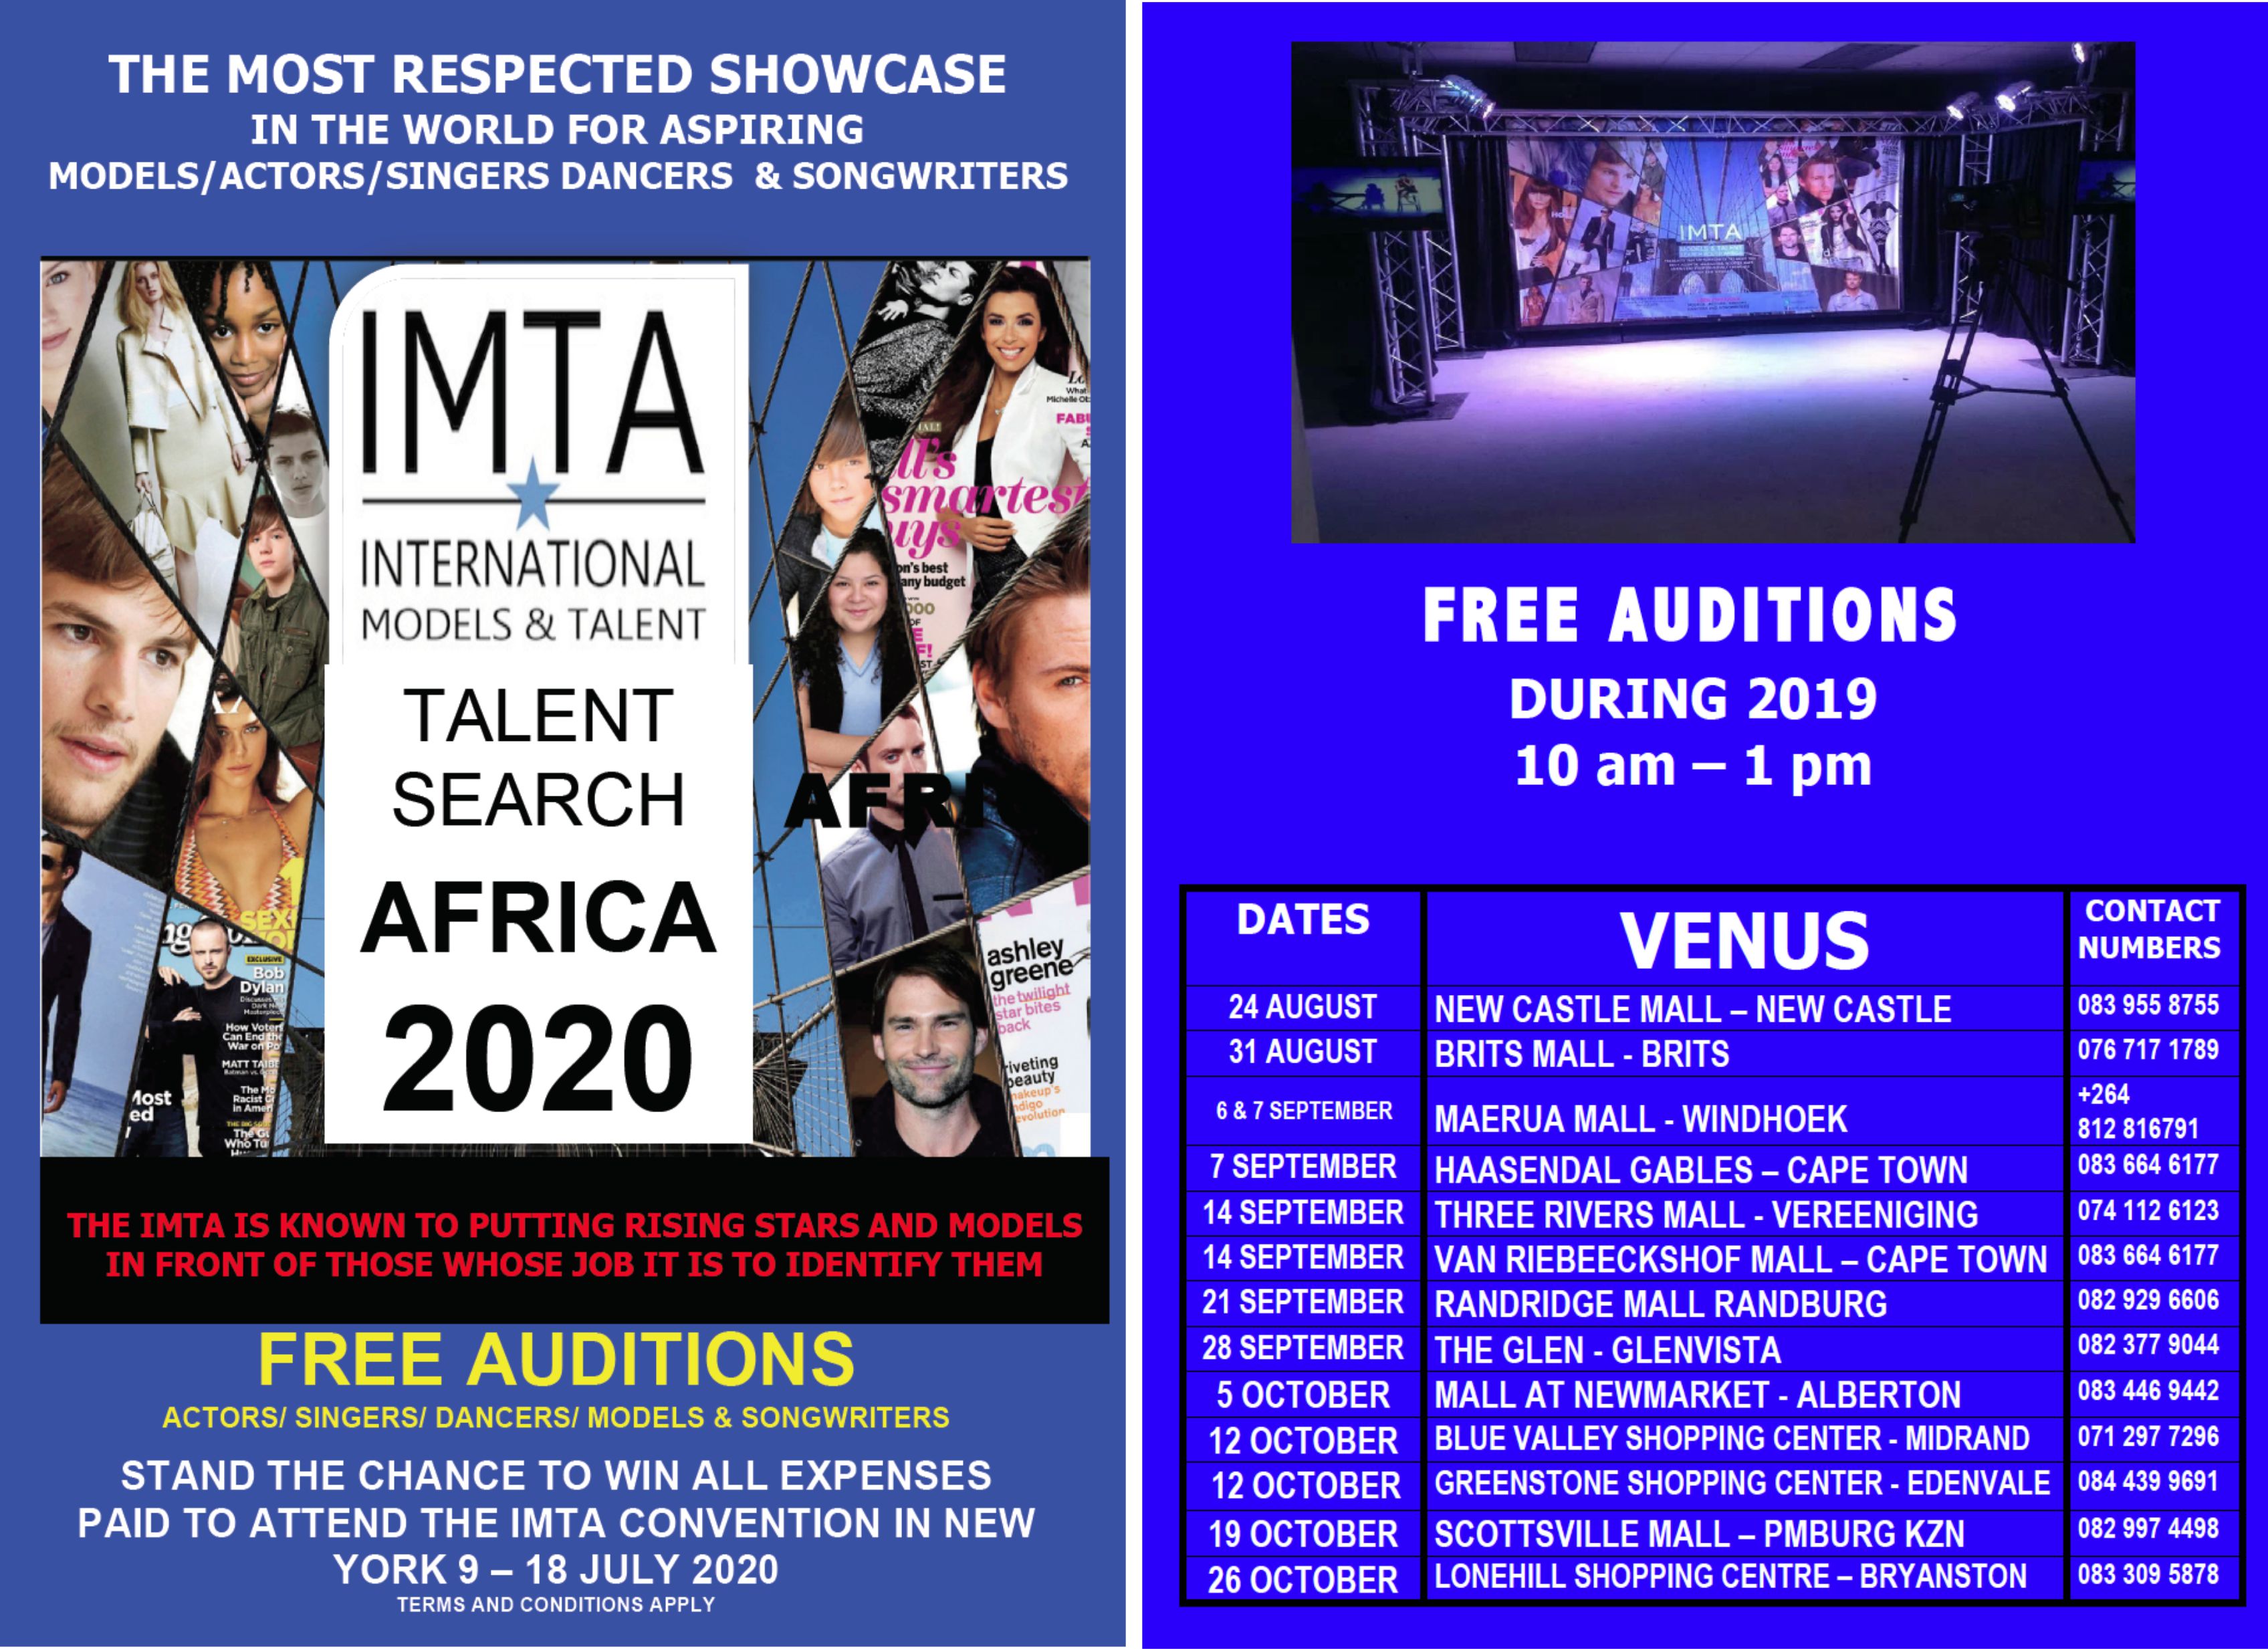 IMTA Local Model and Talent Seaches for the International Modeling